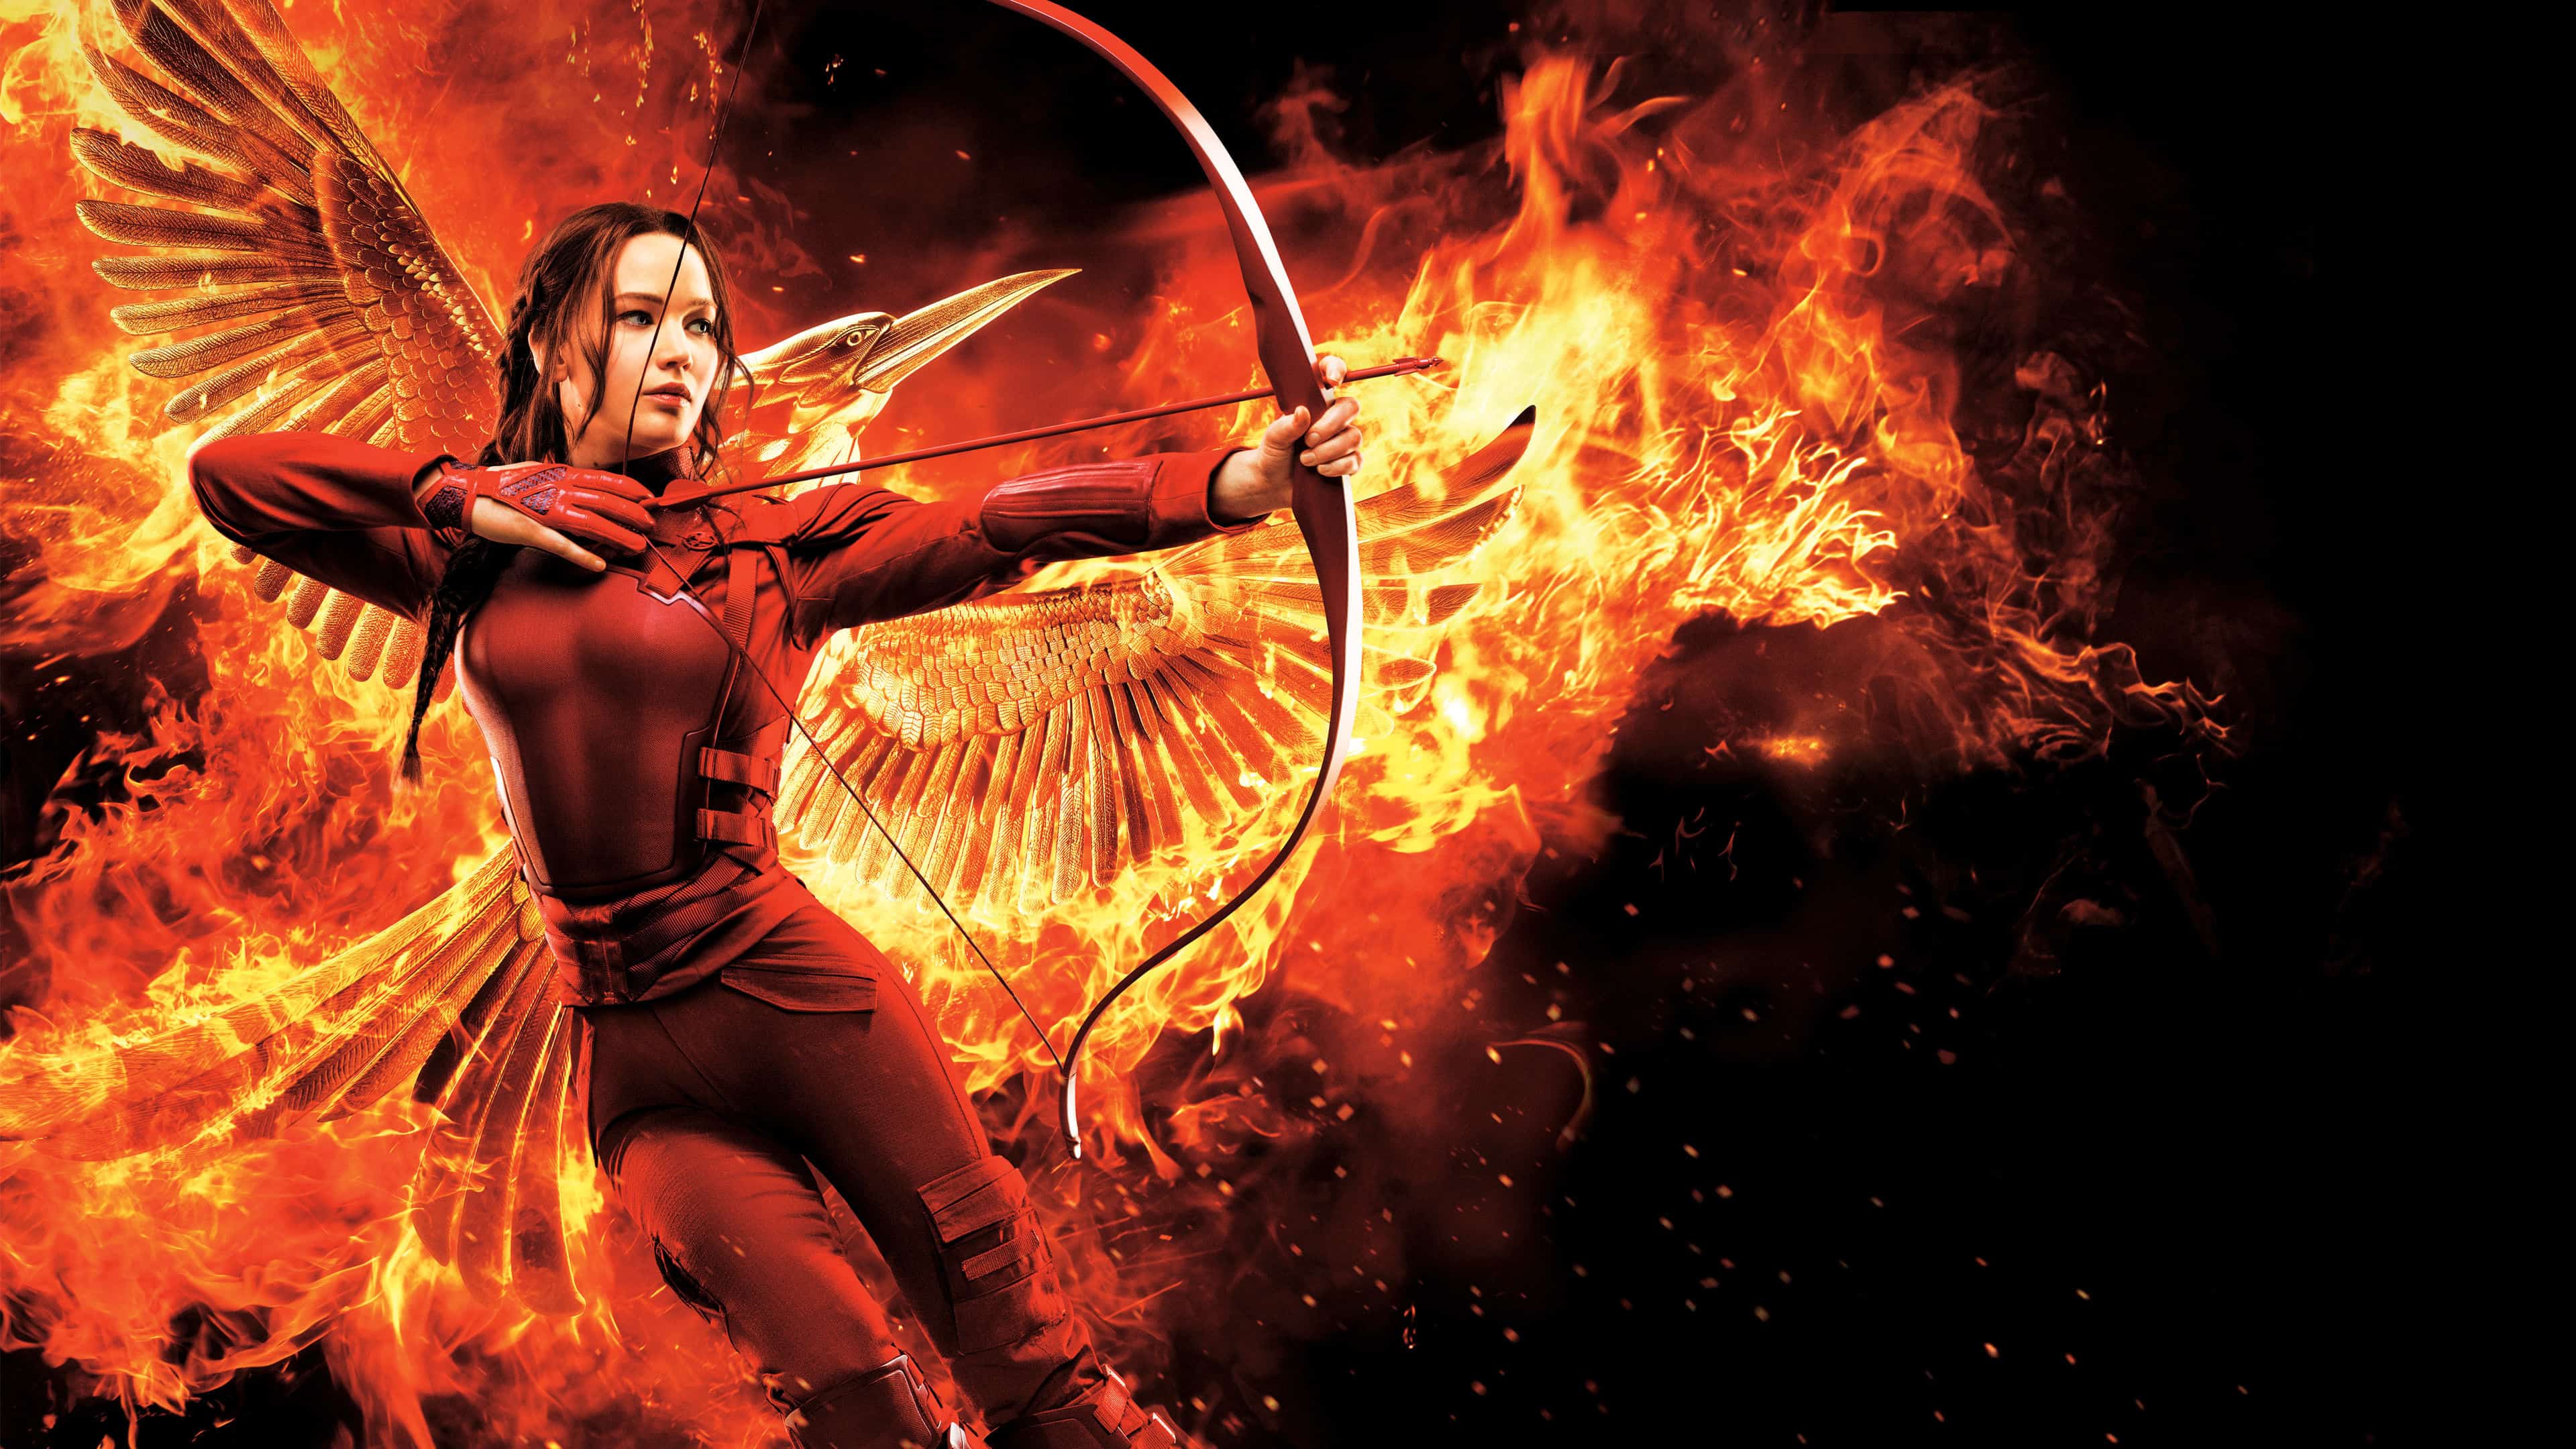 Mockingjay wallpapers for desktop, download free Mockingjay pictures and  backgrounds for PC | mob.org